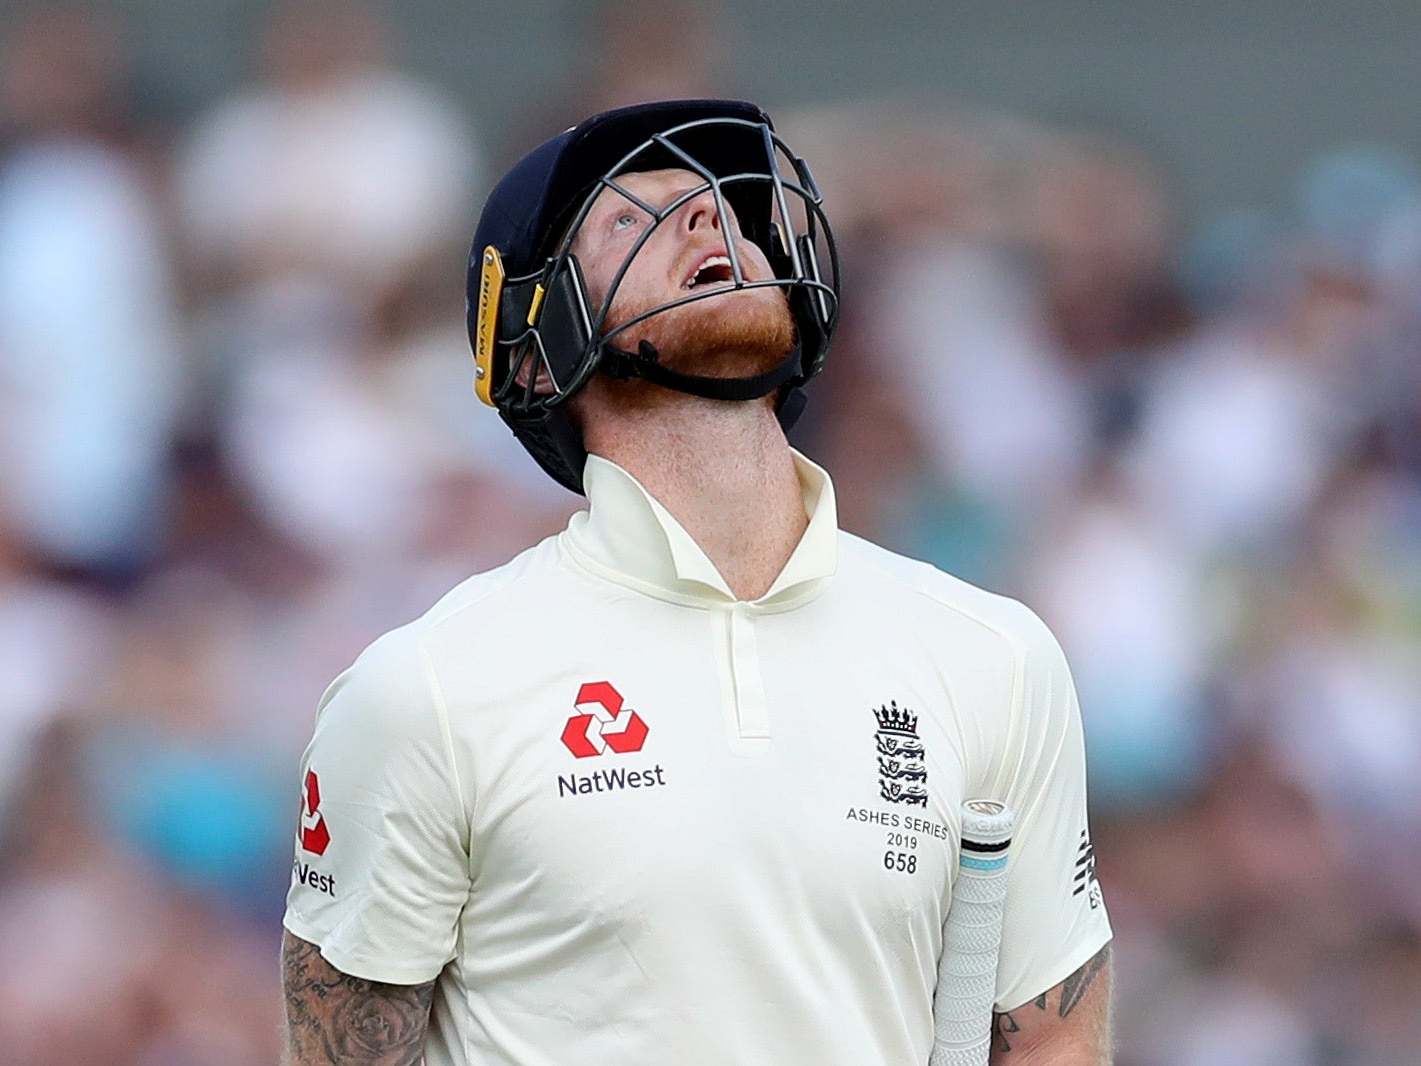 Ben Stokes was unable to provide a miracle this time around